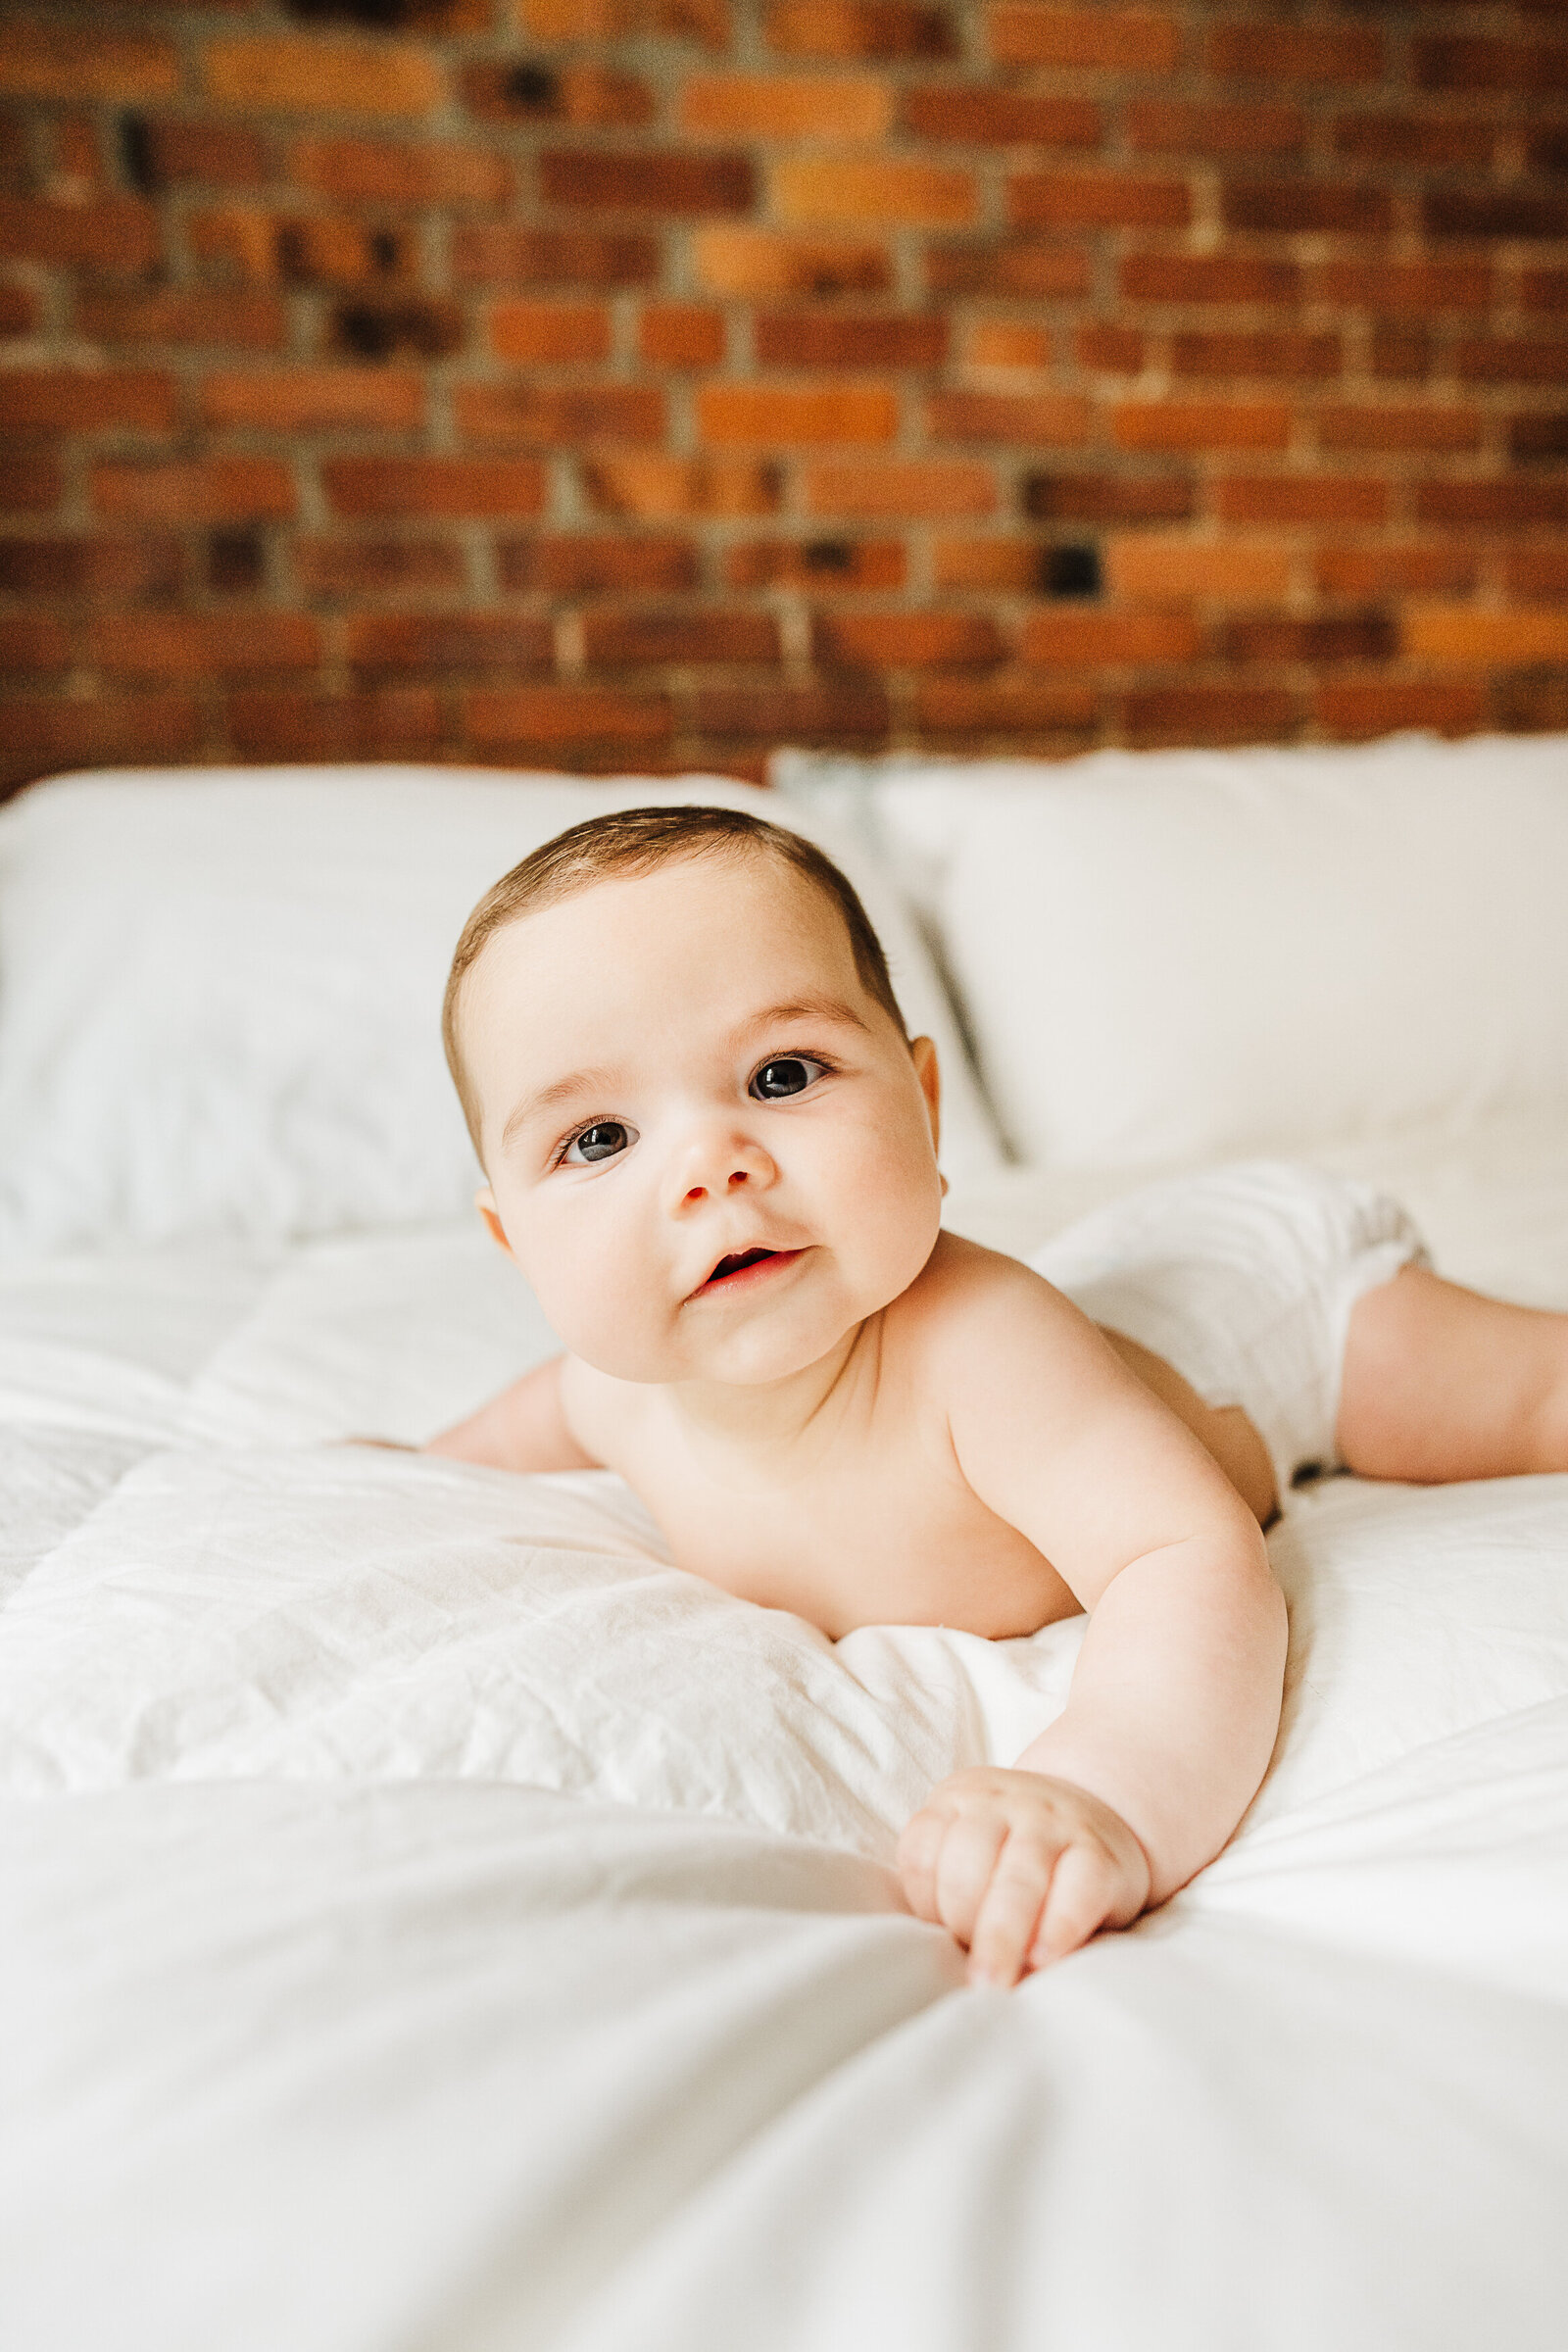 baby in a diaper looks at camera on bed